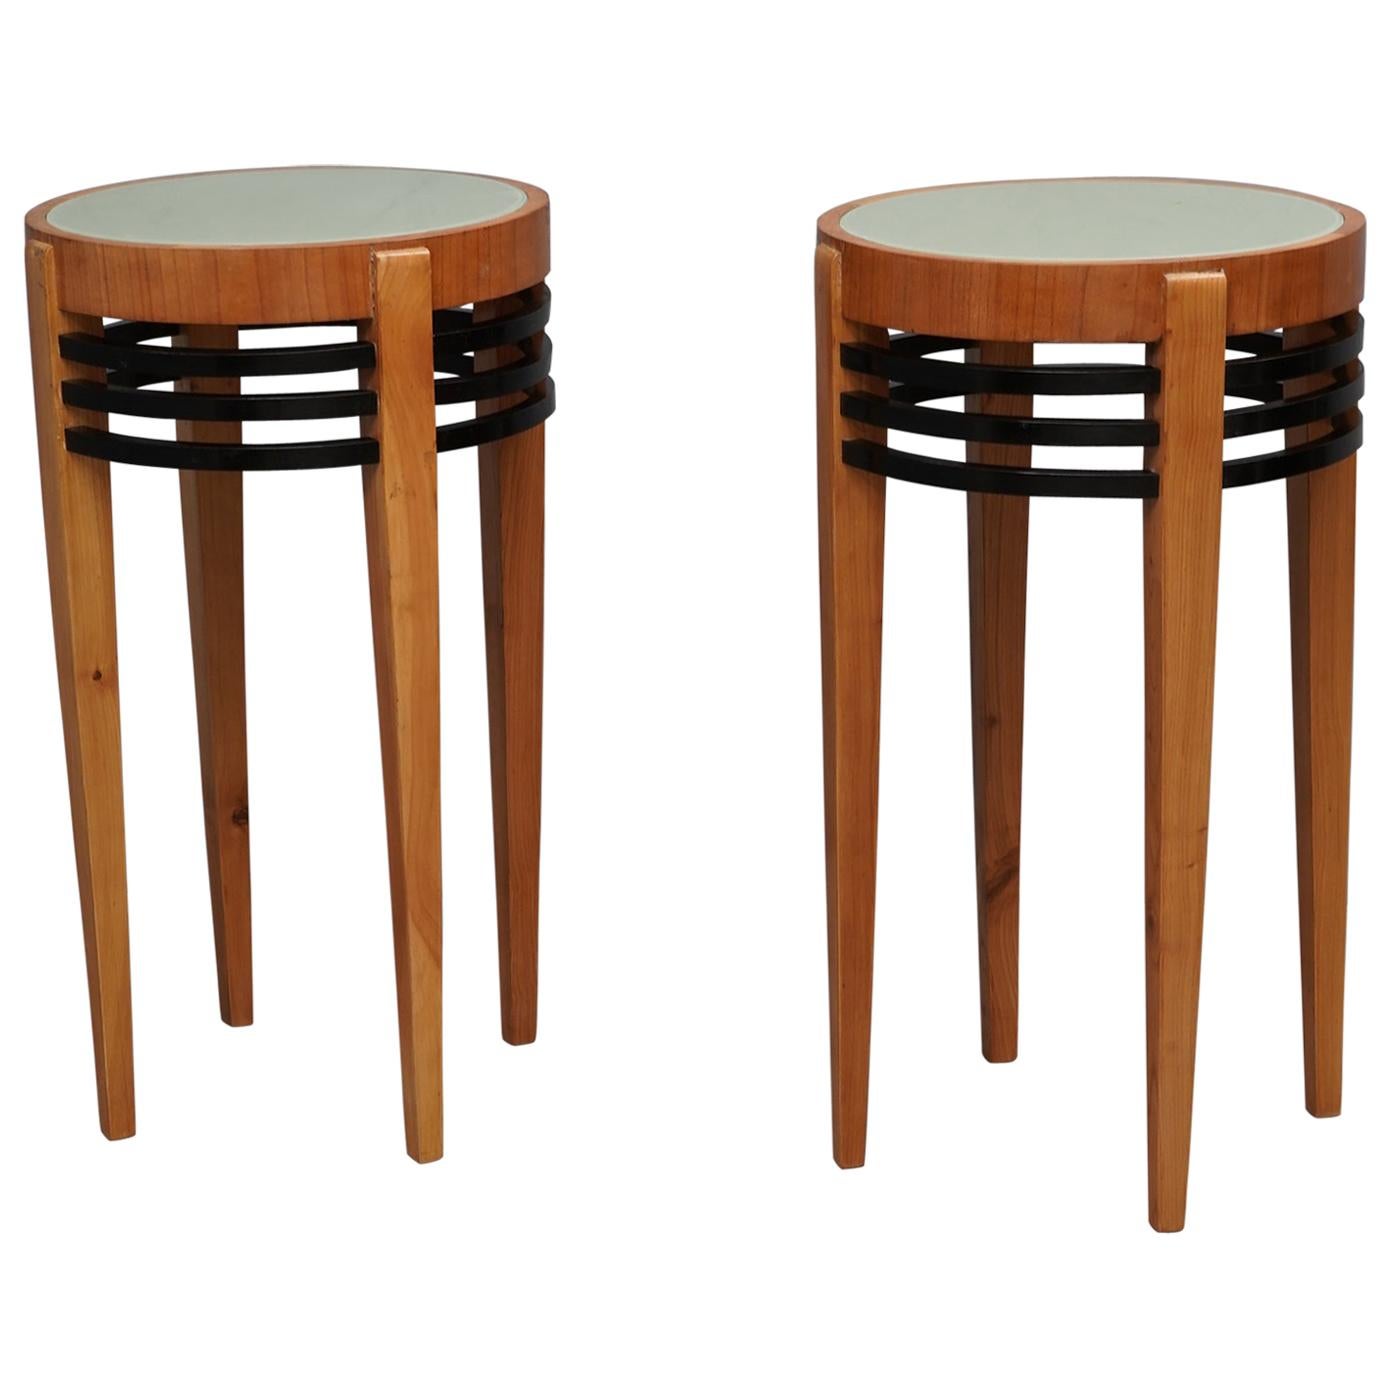 Pair of Art Deco Round Cherrywood and Glass Side Tables, 1930